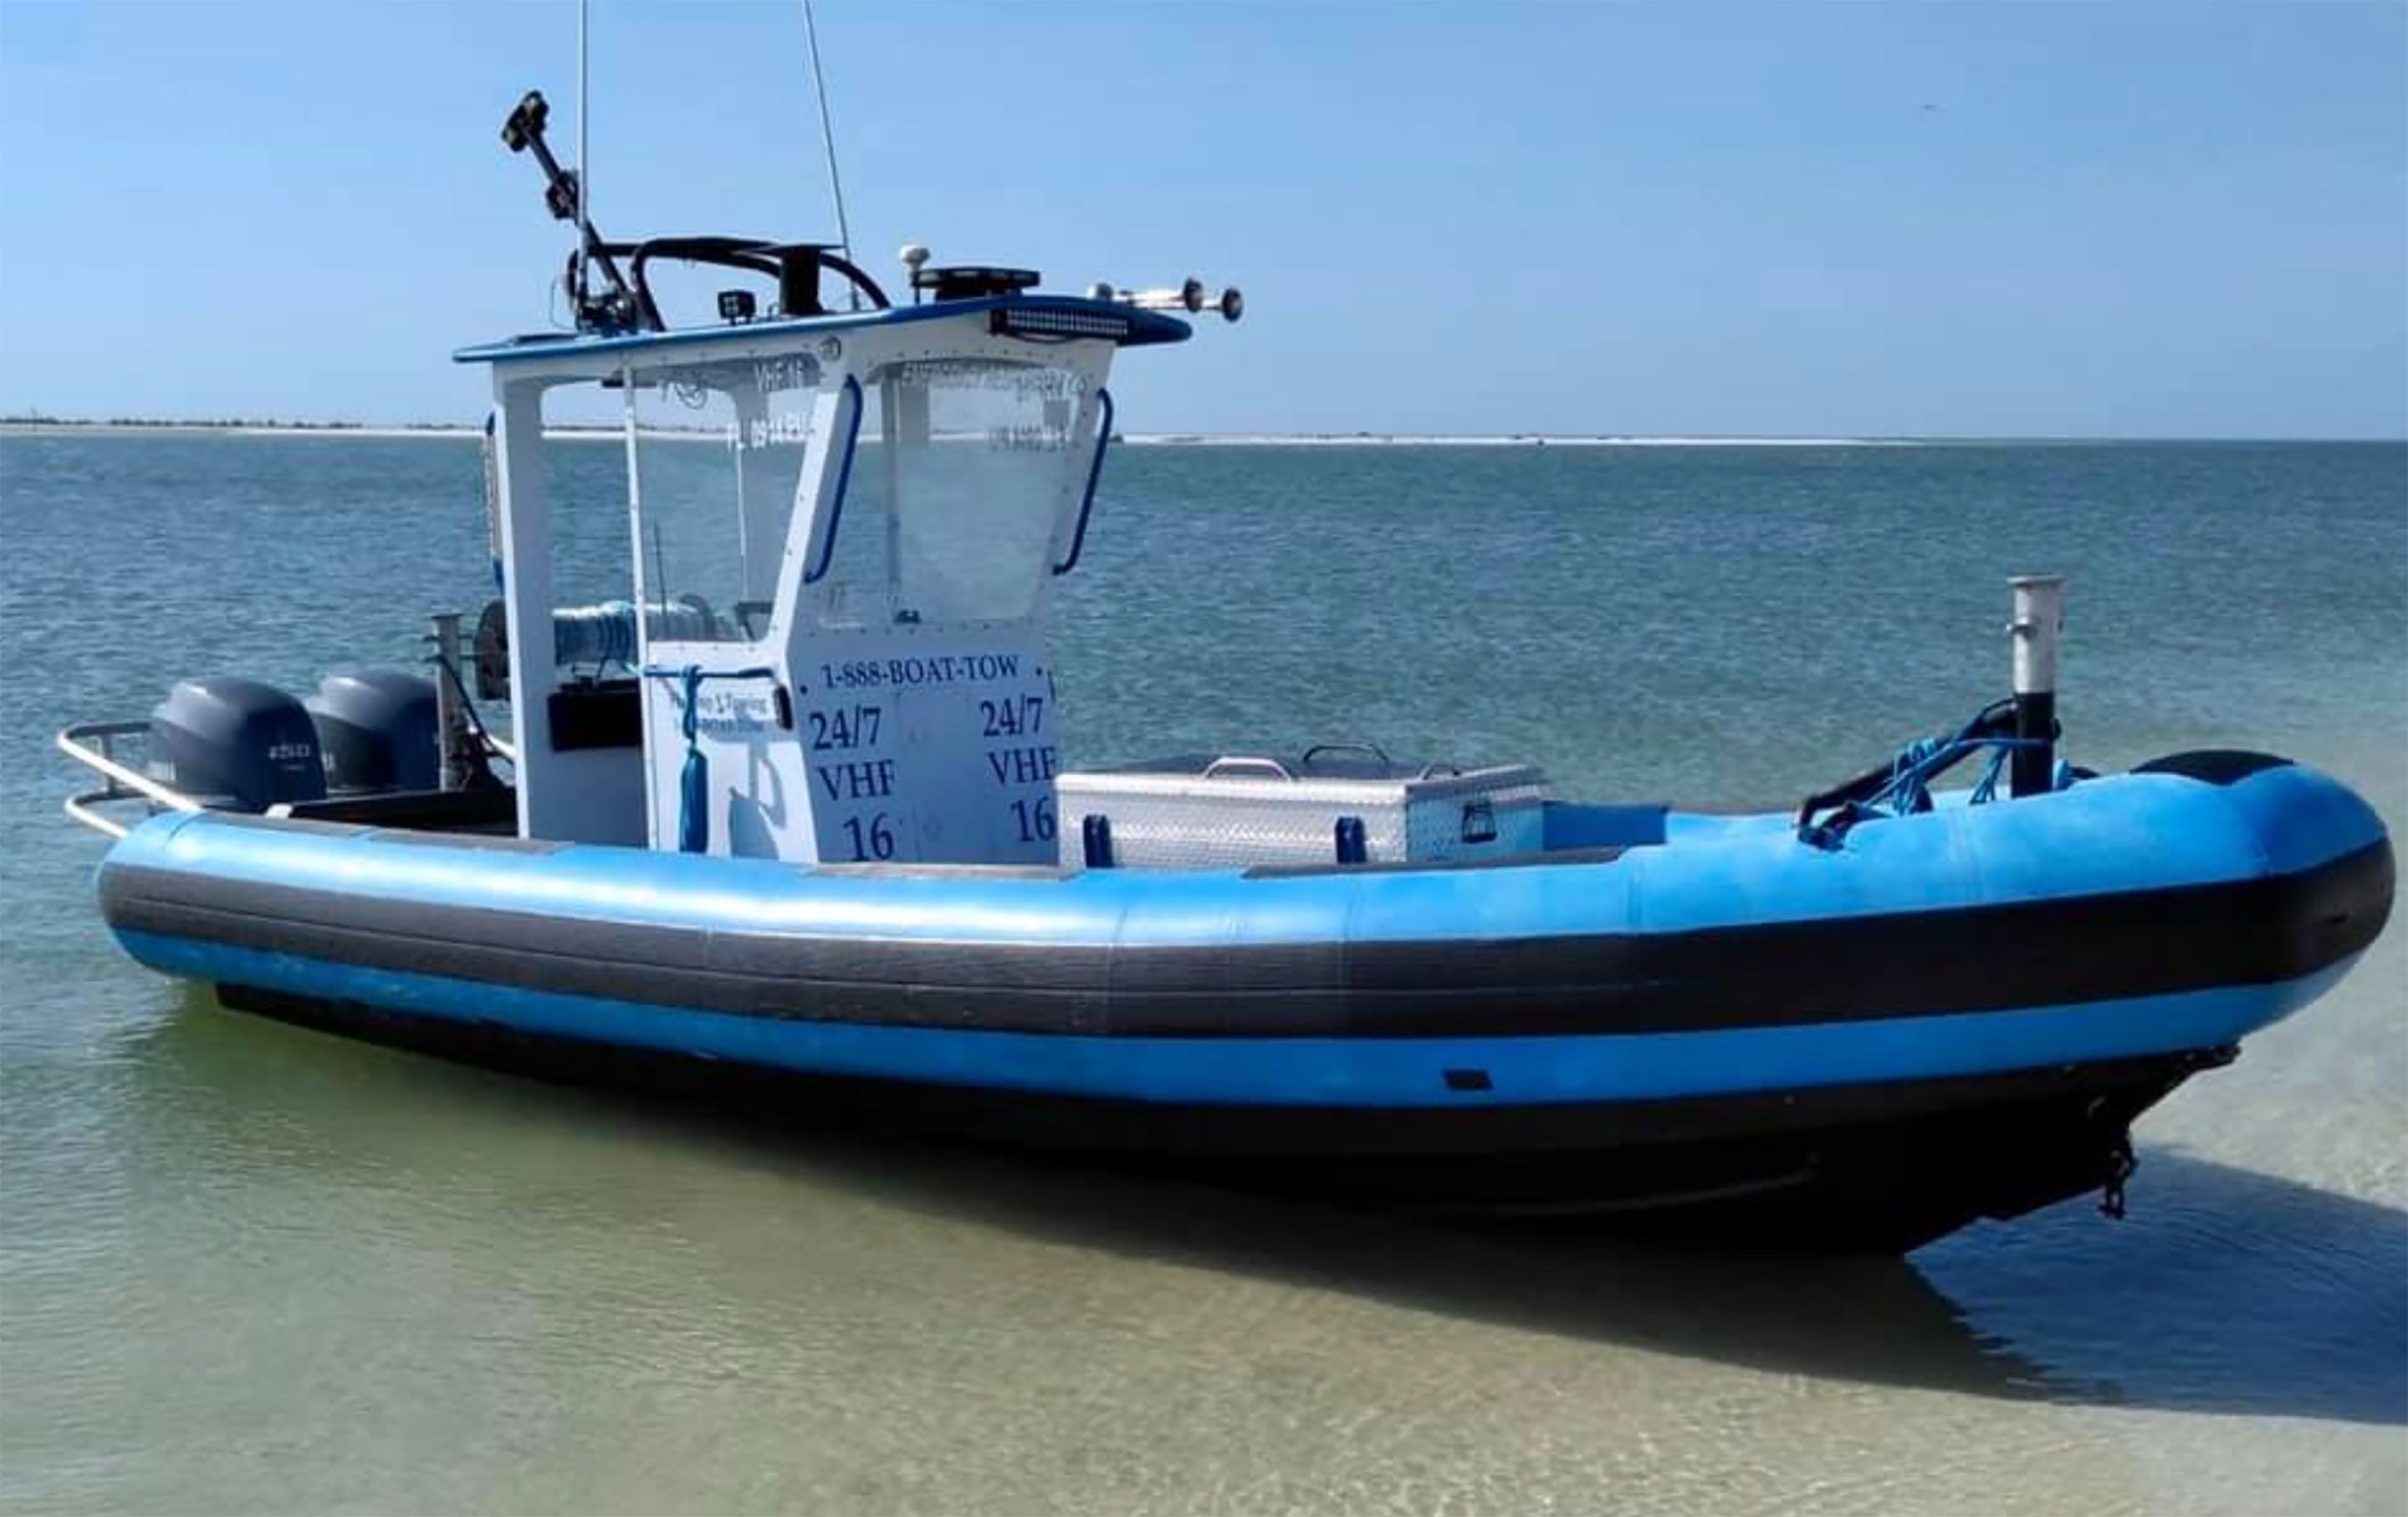 24/7 EMERGENCY BOAT TOWING SERVICES